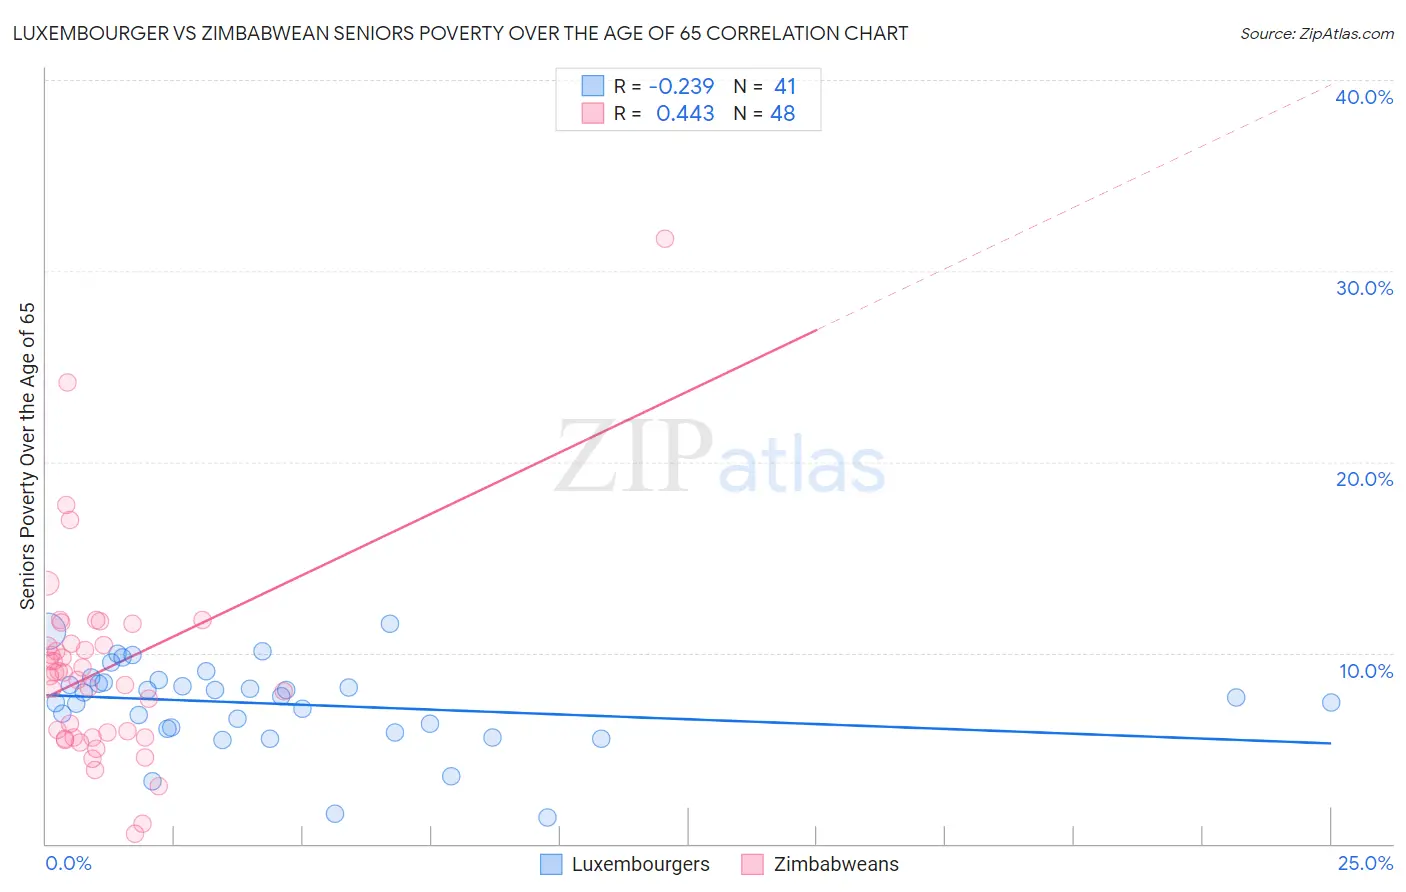 Luxembourger vs Zimbabwean Seniors Poverty Over the Age of 65